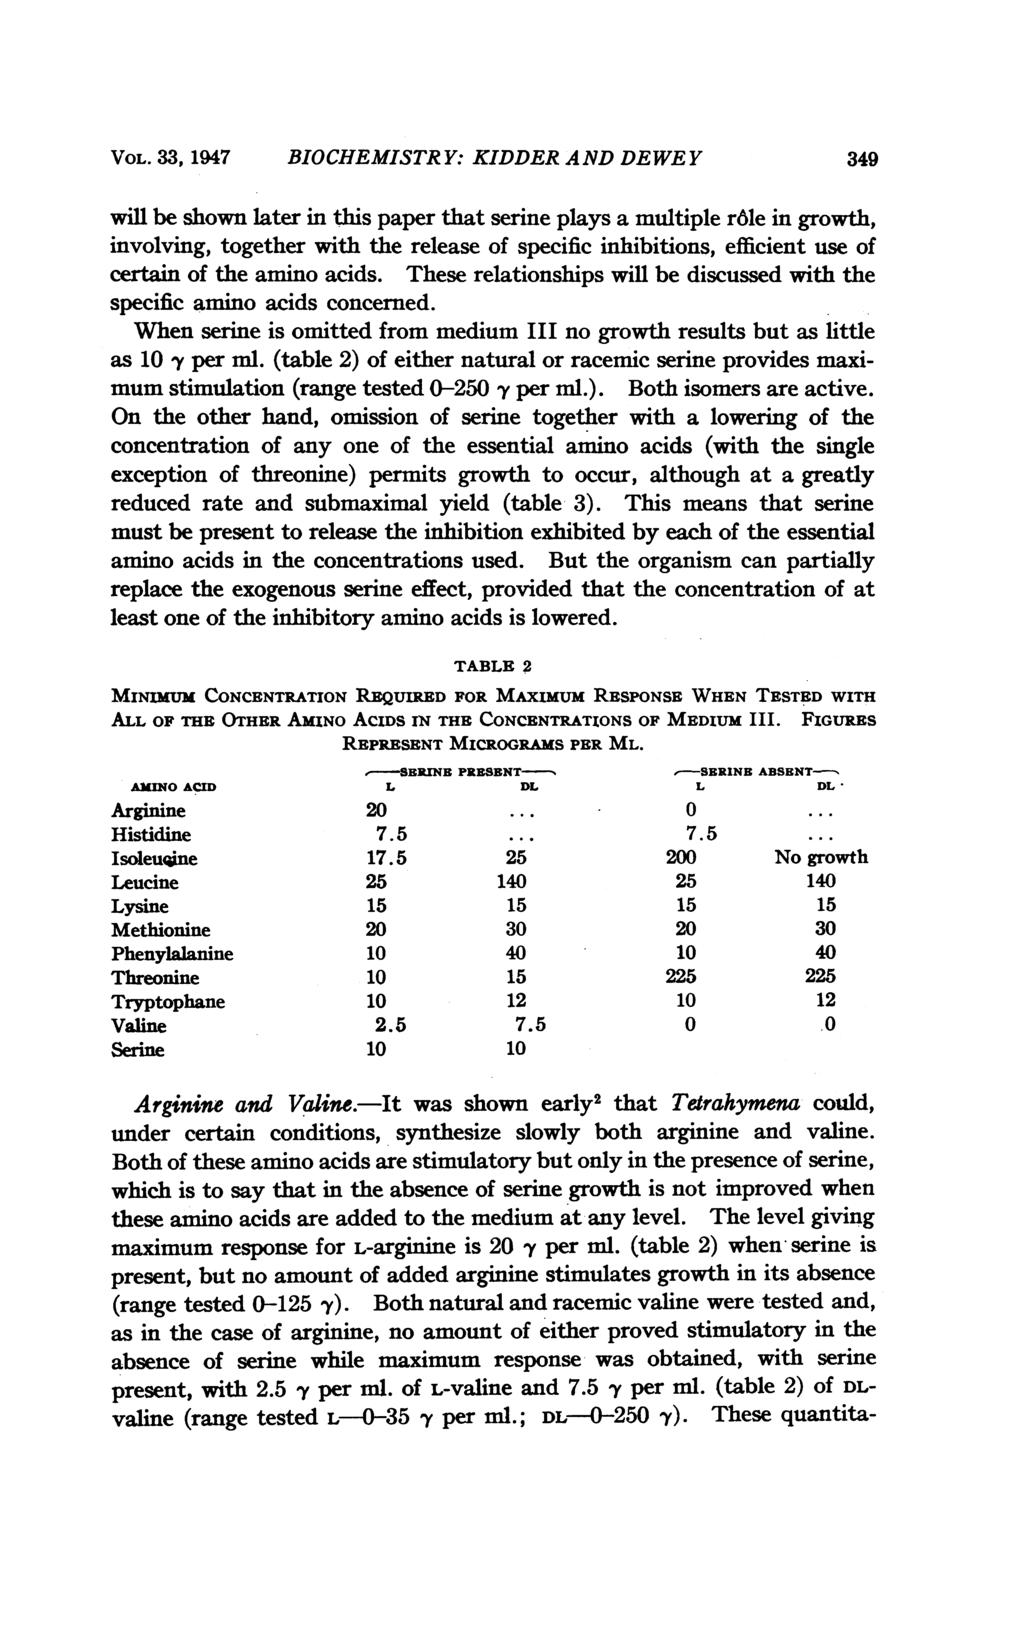 VOL. 33, 1947 BIOCHEMISTRY: KIDDER AND DE WE Y 349 will be shown later in this paper that serine plays a multiple r6le in growth, involving, together with the release of specific inhibitions,